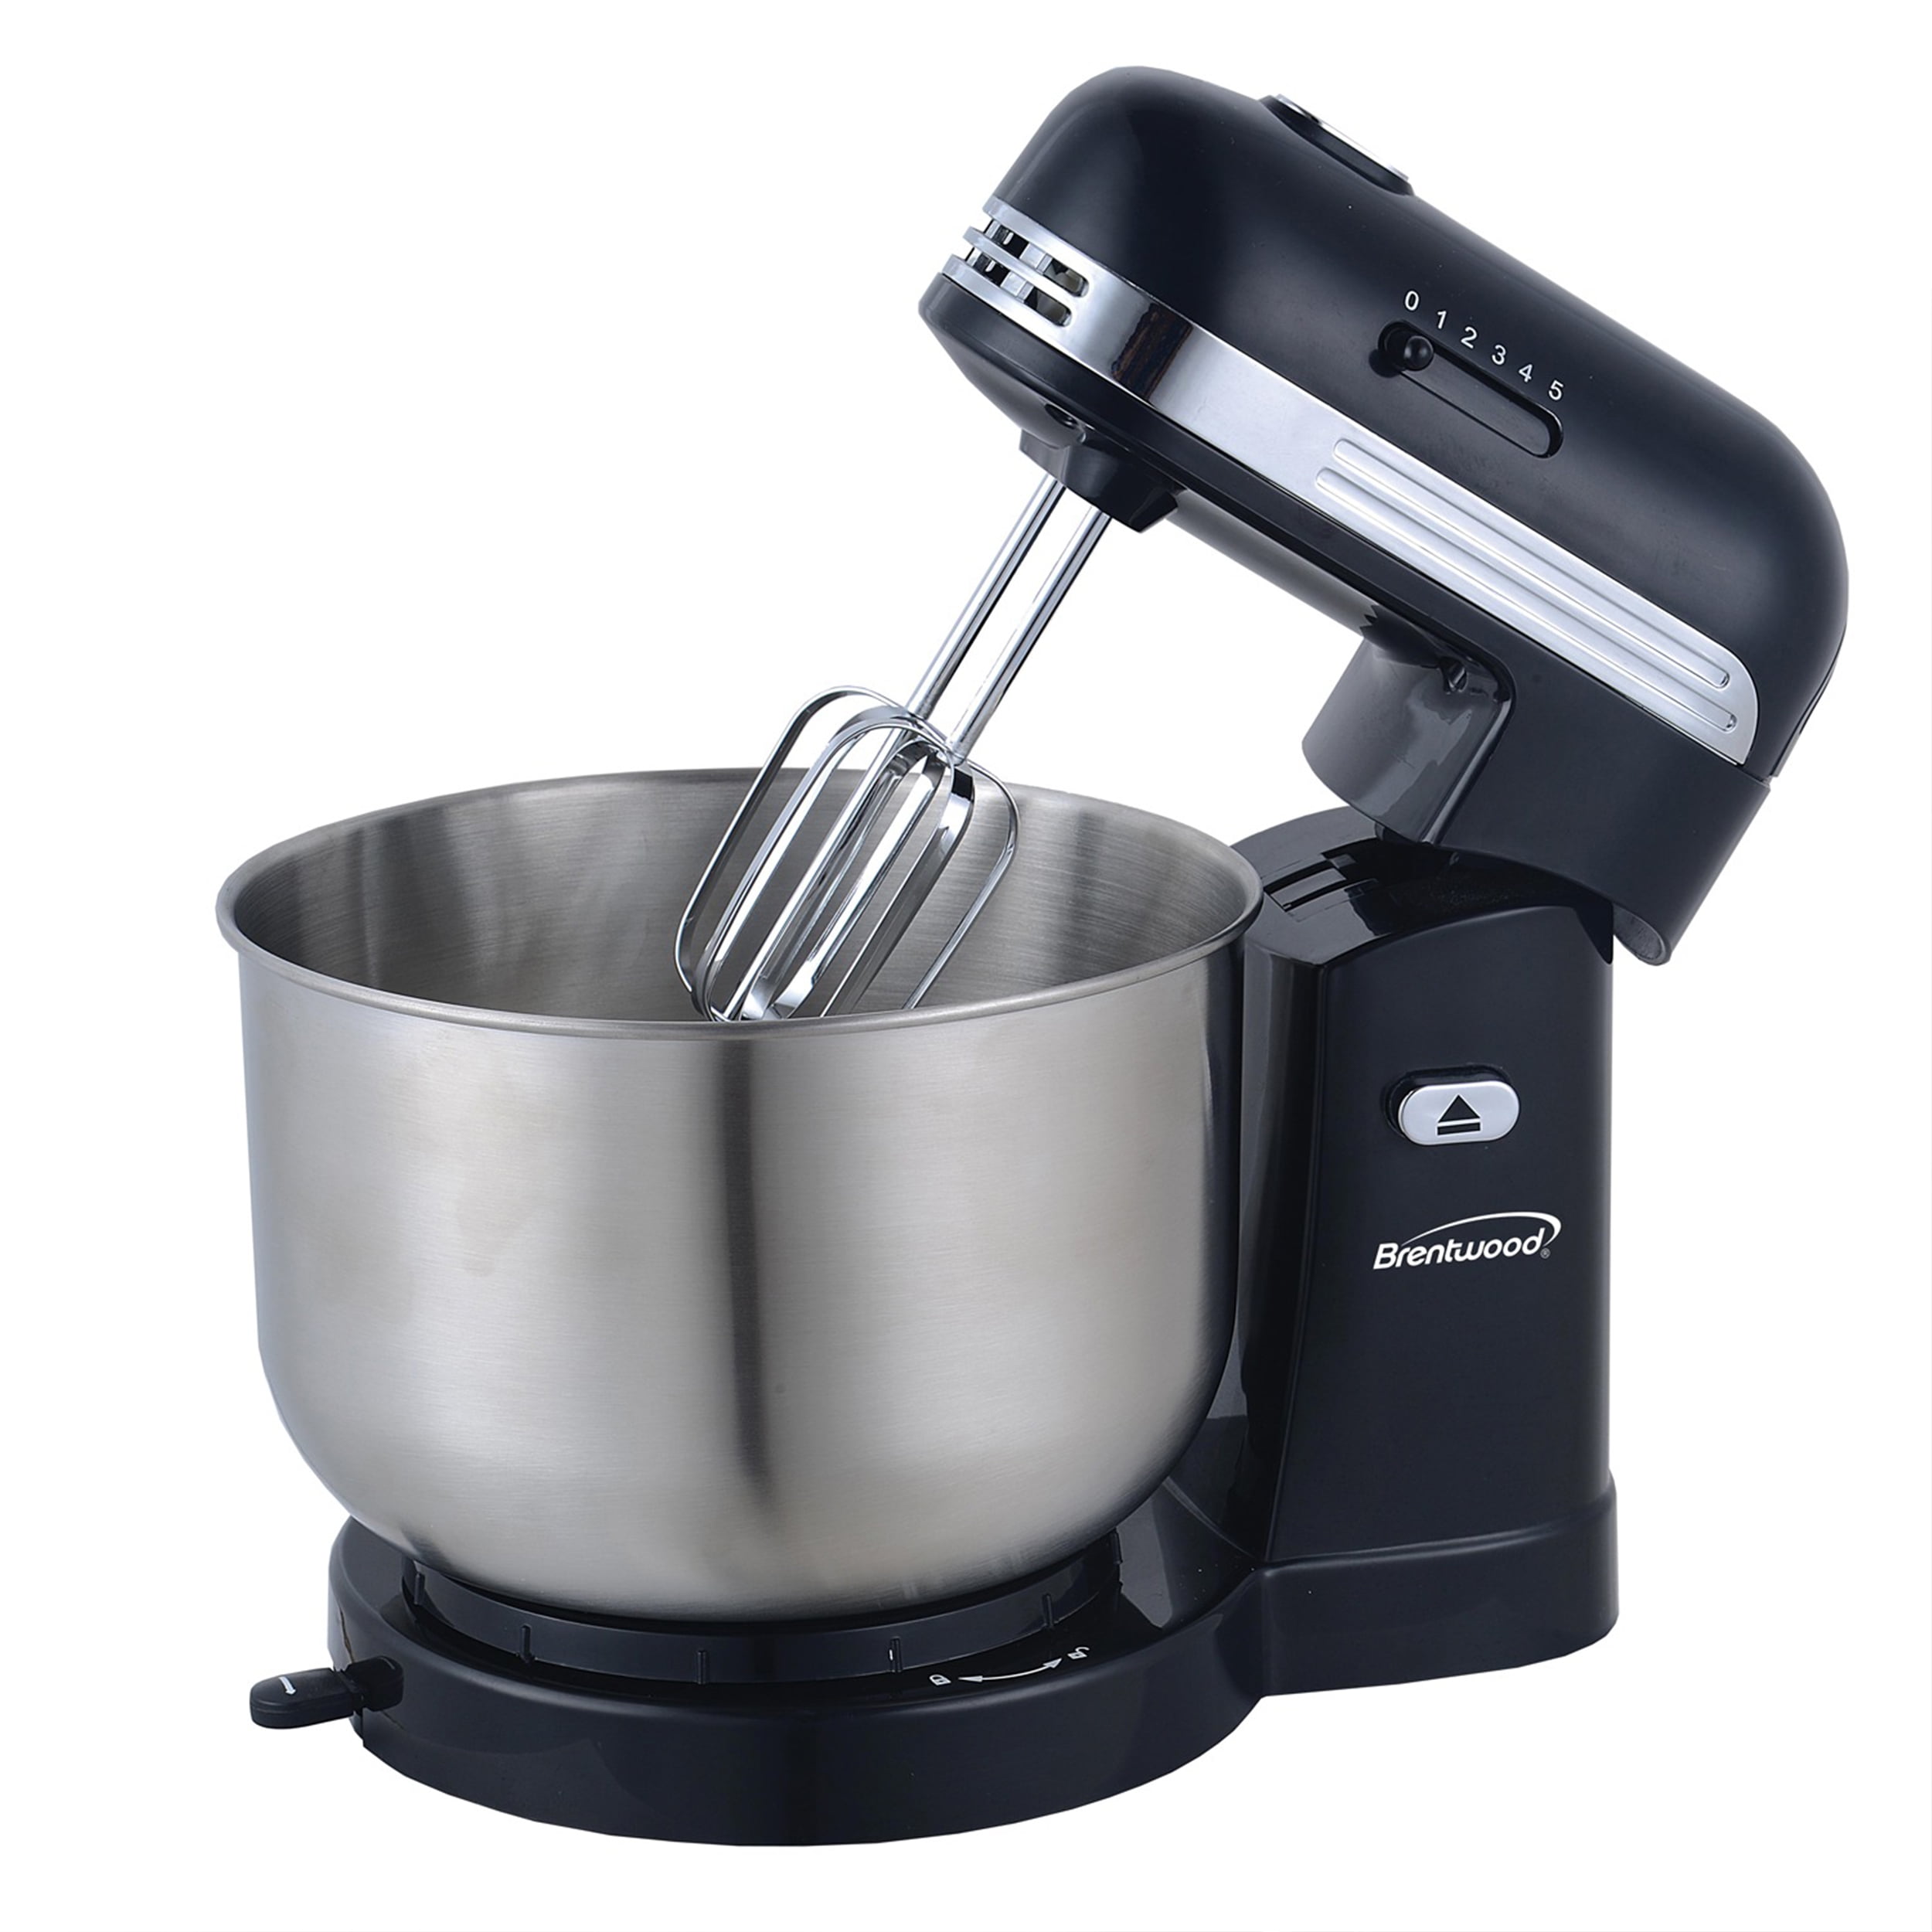 SMAGREHO 6-Quart Classic Series Tilt-Head Stand Mixer with Pouring Shield General 